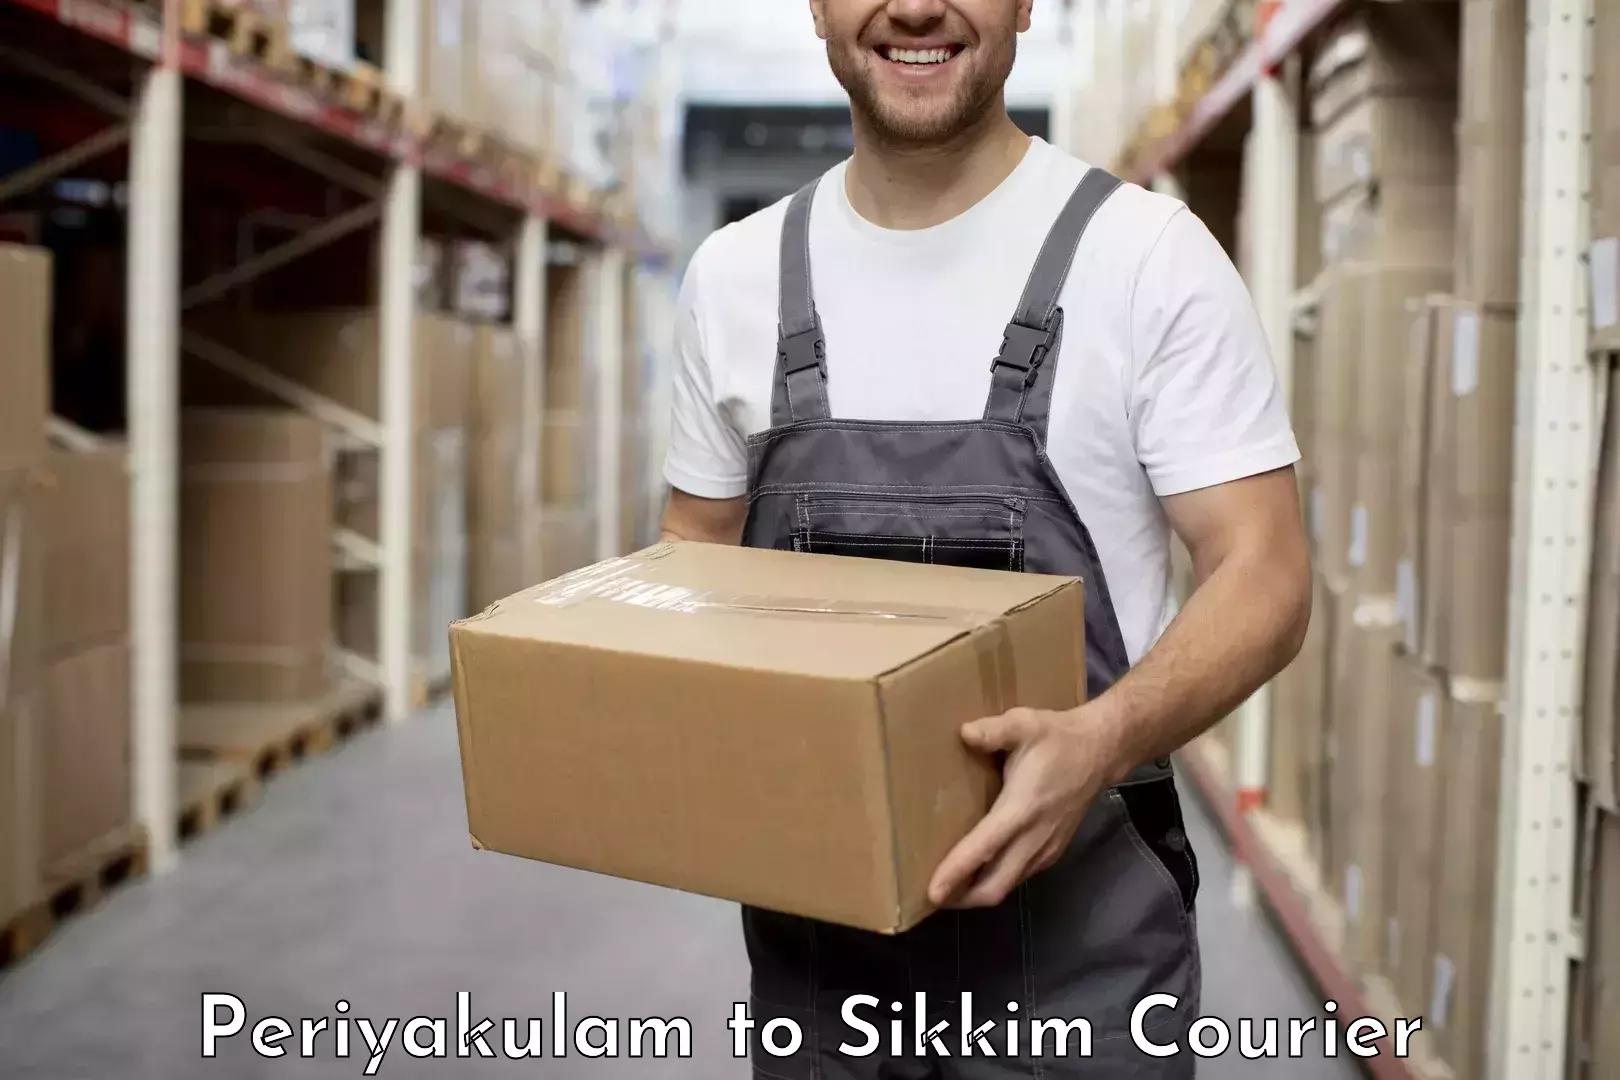 Customer-friendly courier services Periyakulam to Pelling